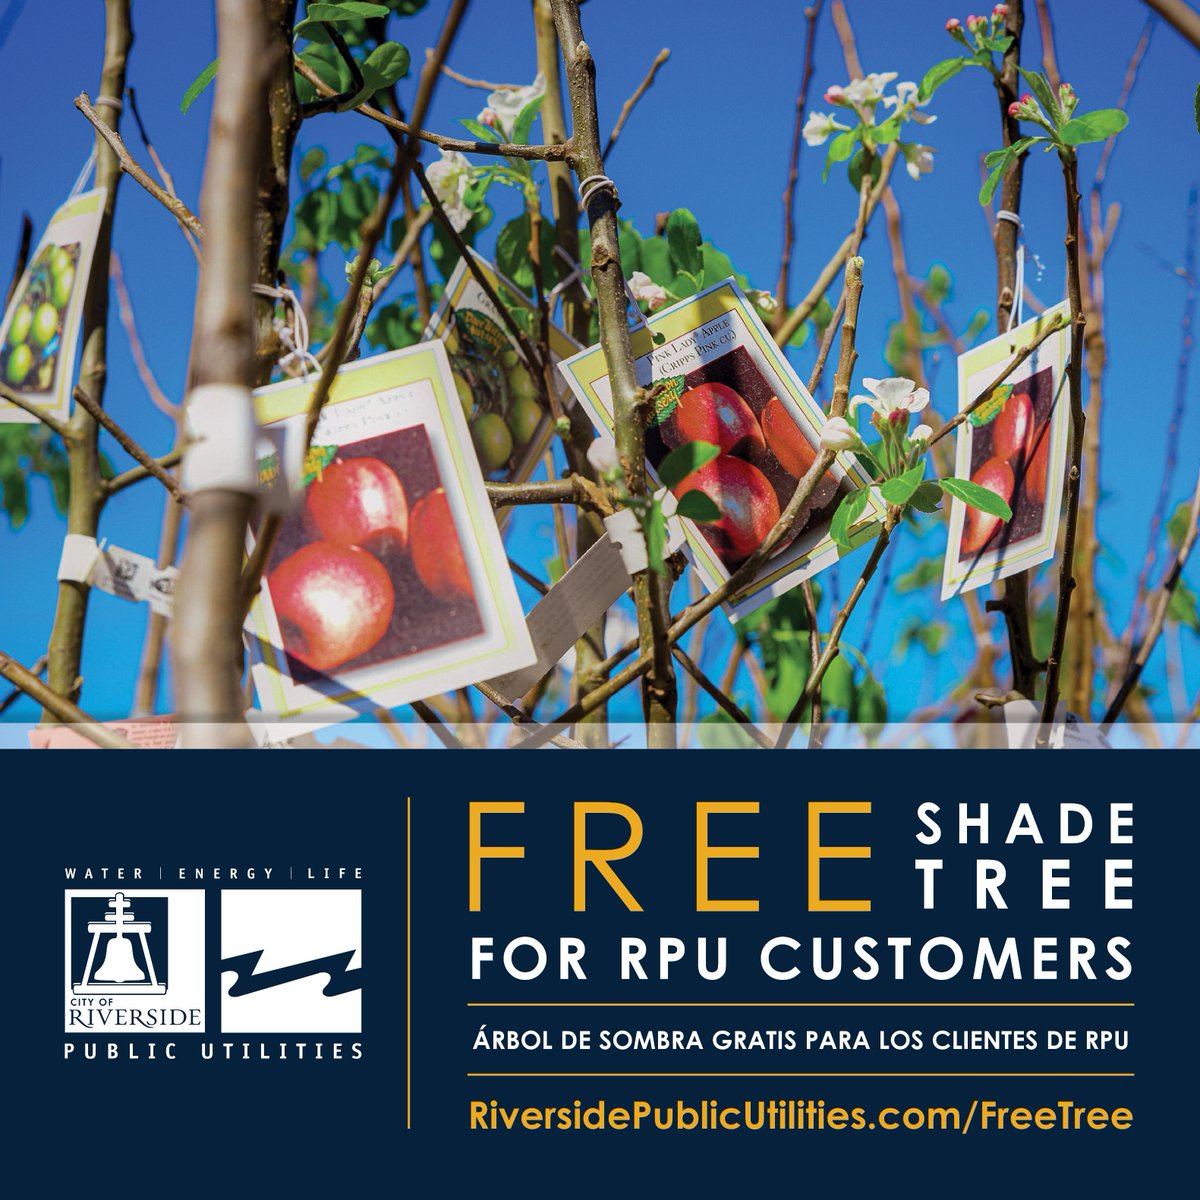 This #ArborDay, we would like to remind our Customers to take advantage of our Tree Power Program and claim your Free Shade Tree before June 30th and plant a beautiful shade tree. Happy Planting! For more details on our Tree Power Program, visit: RiversidePublicUtilities.com/FreeTree